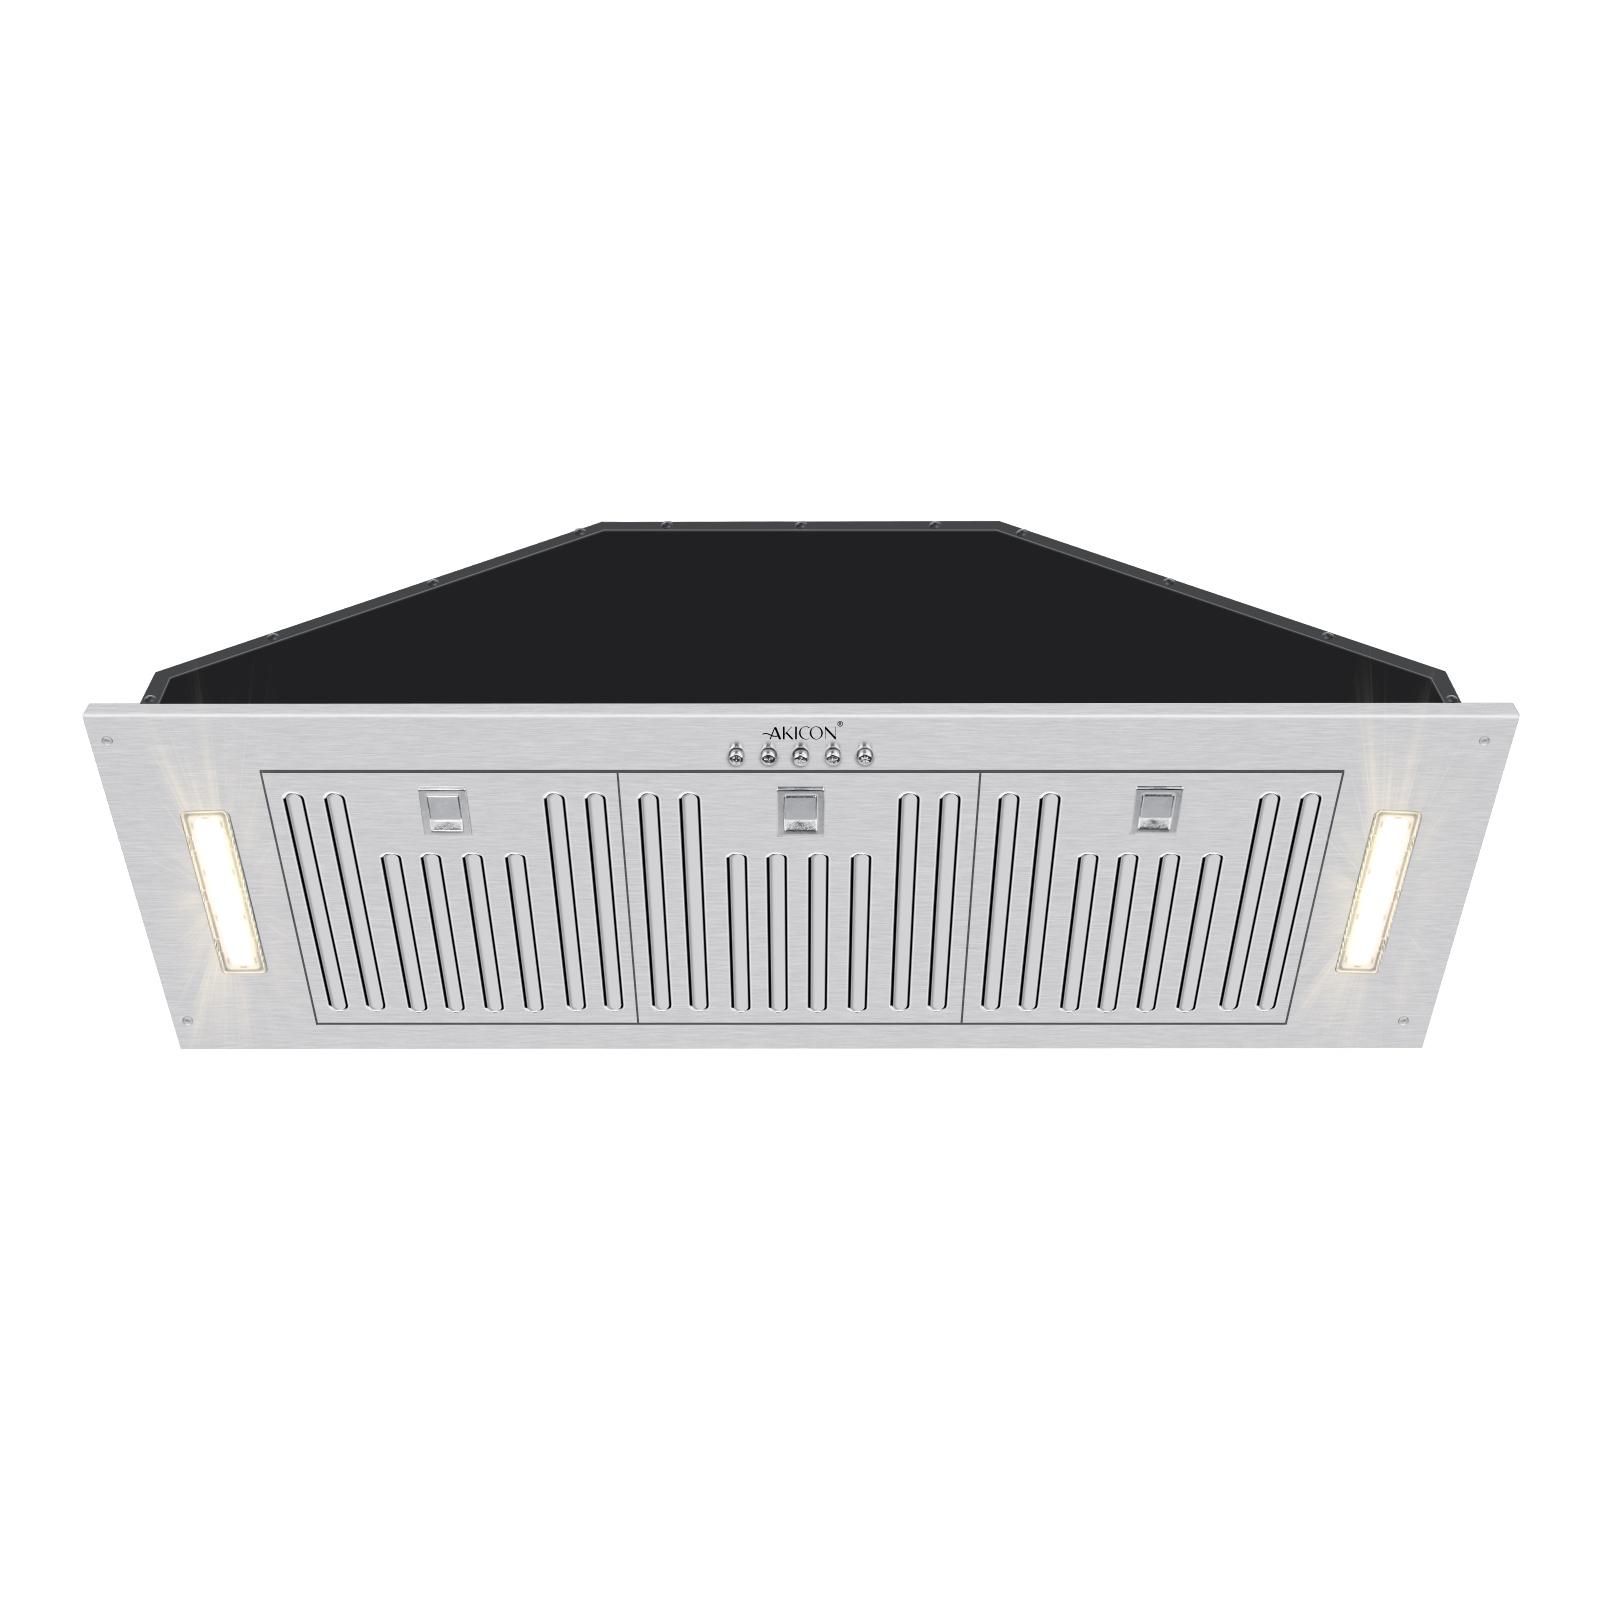 Range Hood Insert 36 Inch, Ultra Quiet, Powerful Suction Built-in Kitchen  Vent Hood, Stainless Steel Ducted Stove Hood with Dimmable LED Lights Warm